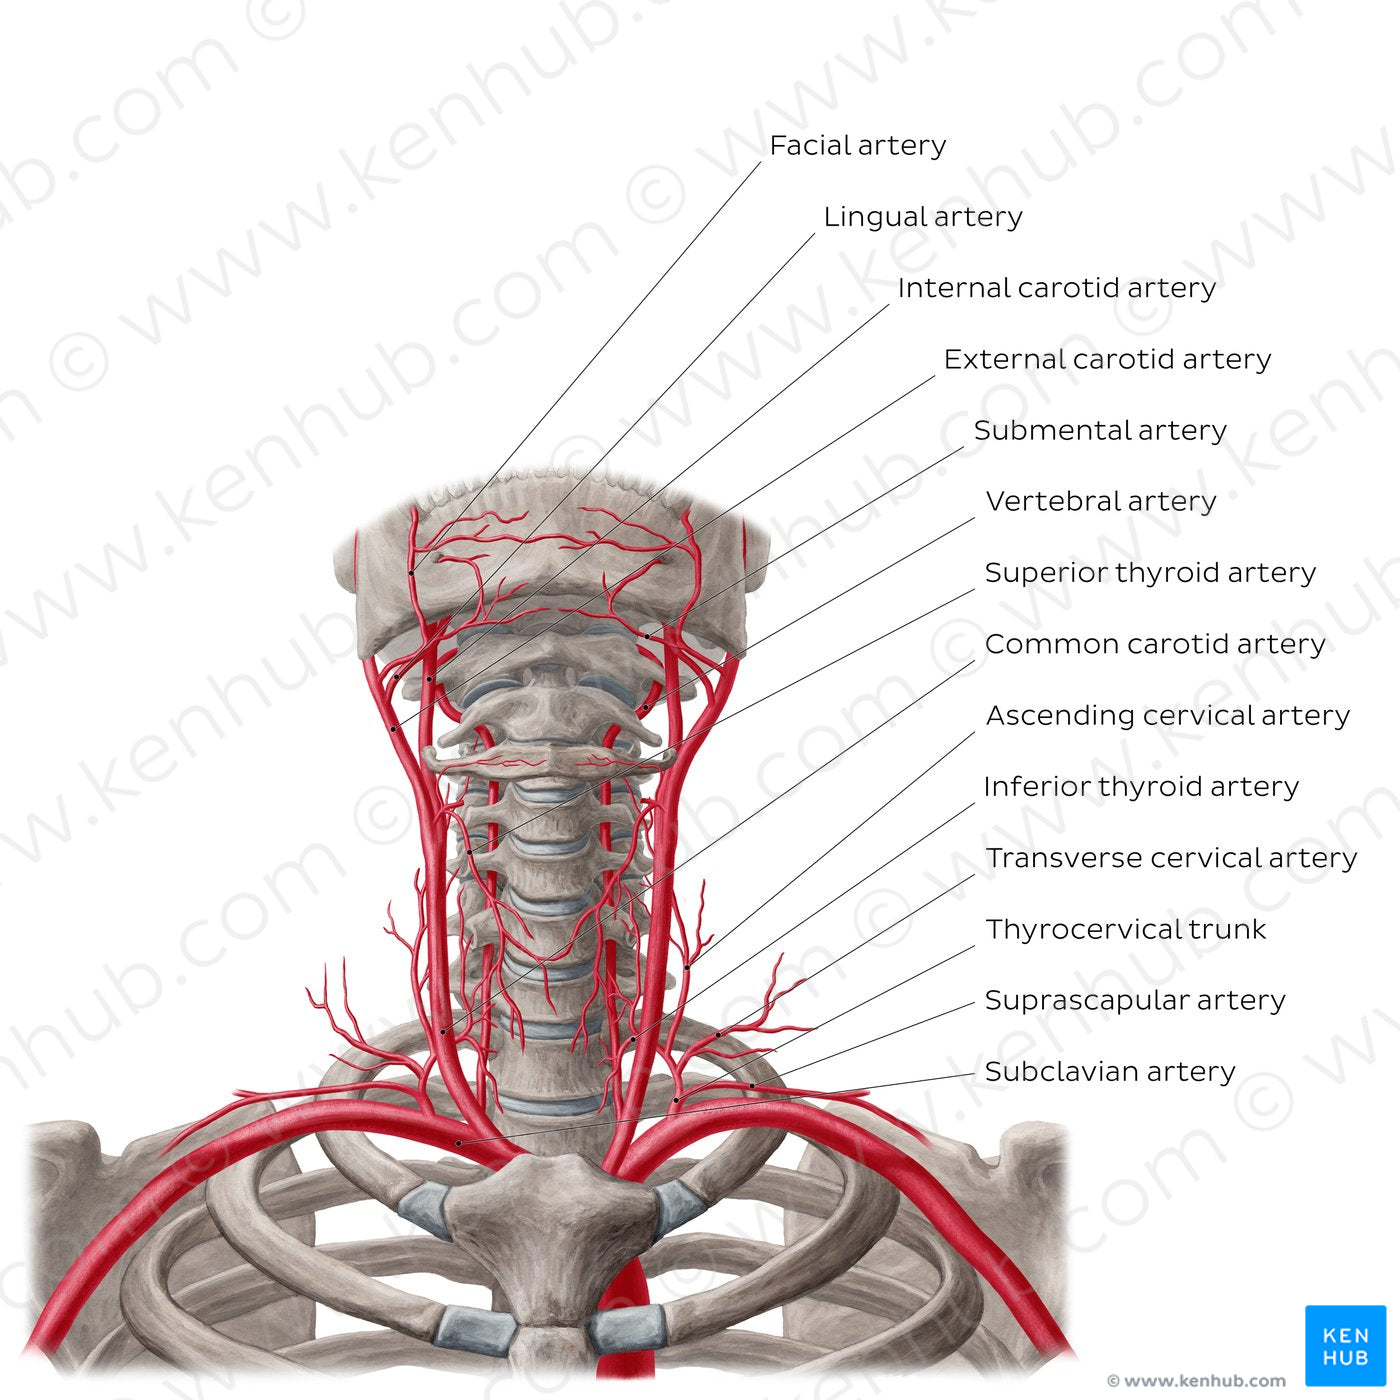 Arteries of the neck (English)